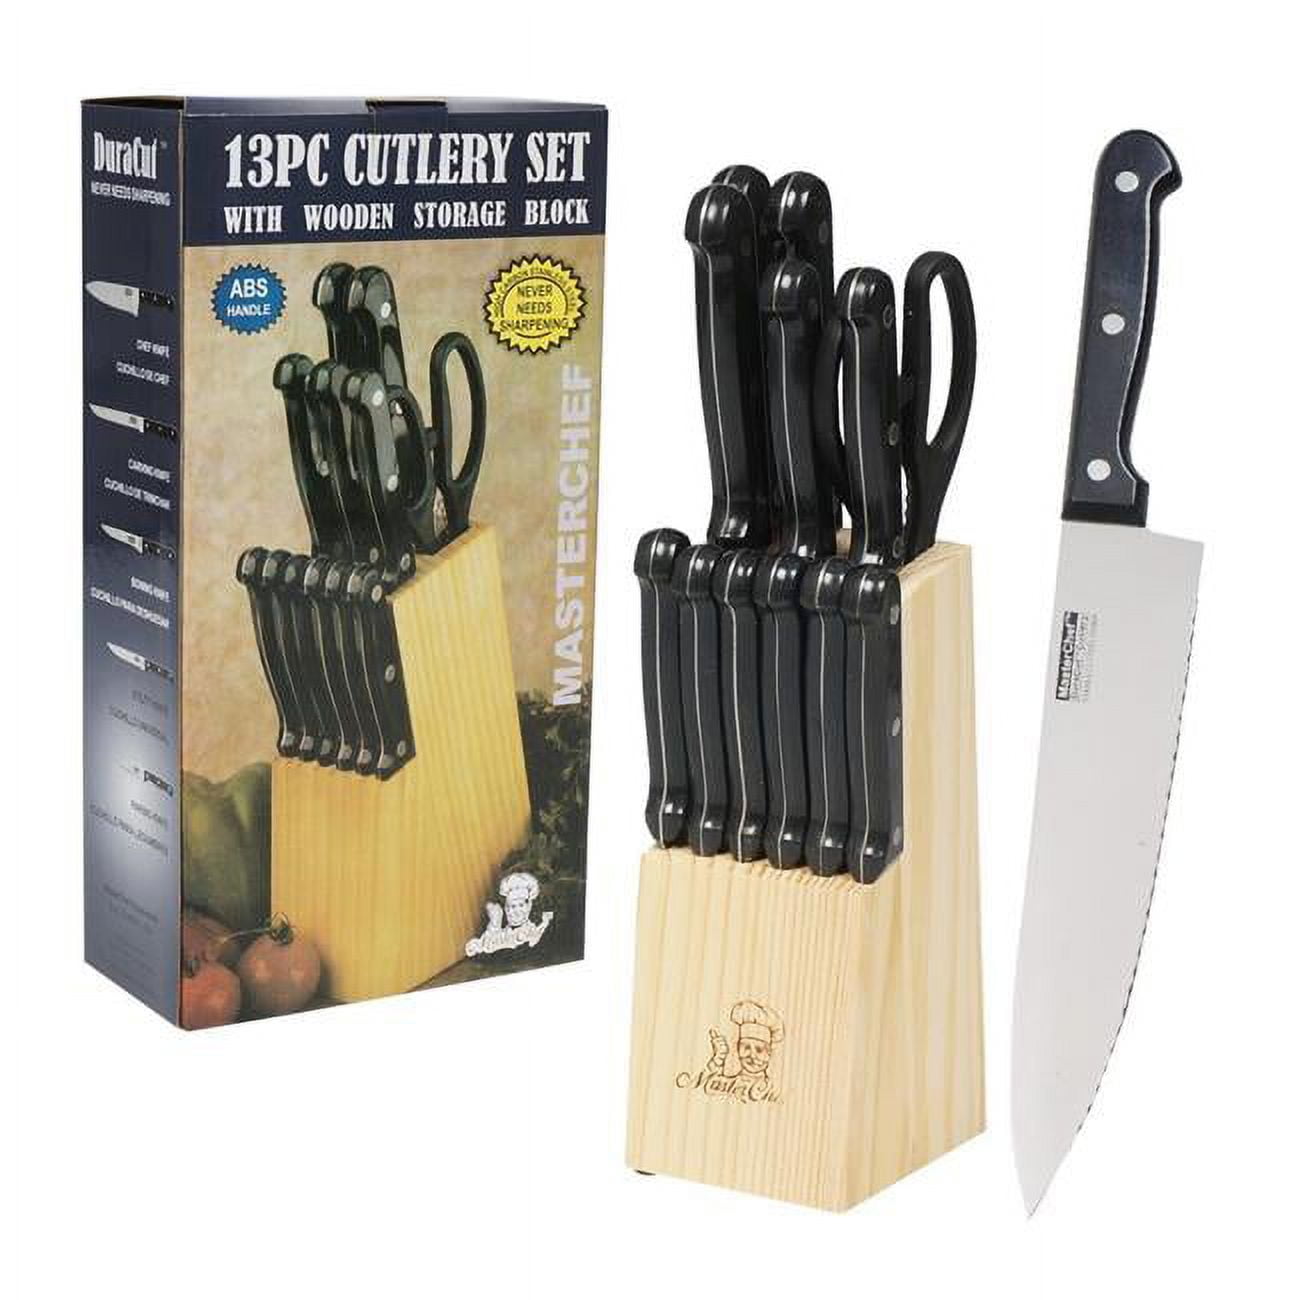 Save 63% on This 15-Piece Knife Set With 25,000+ 5-Star  Reviews